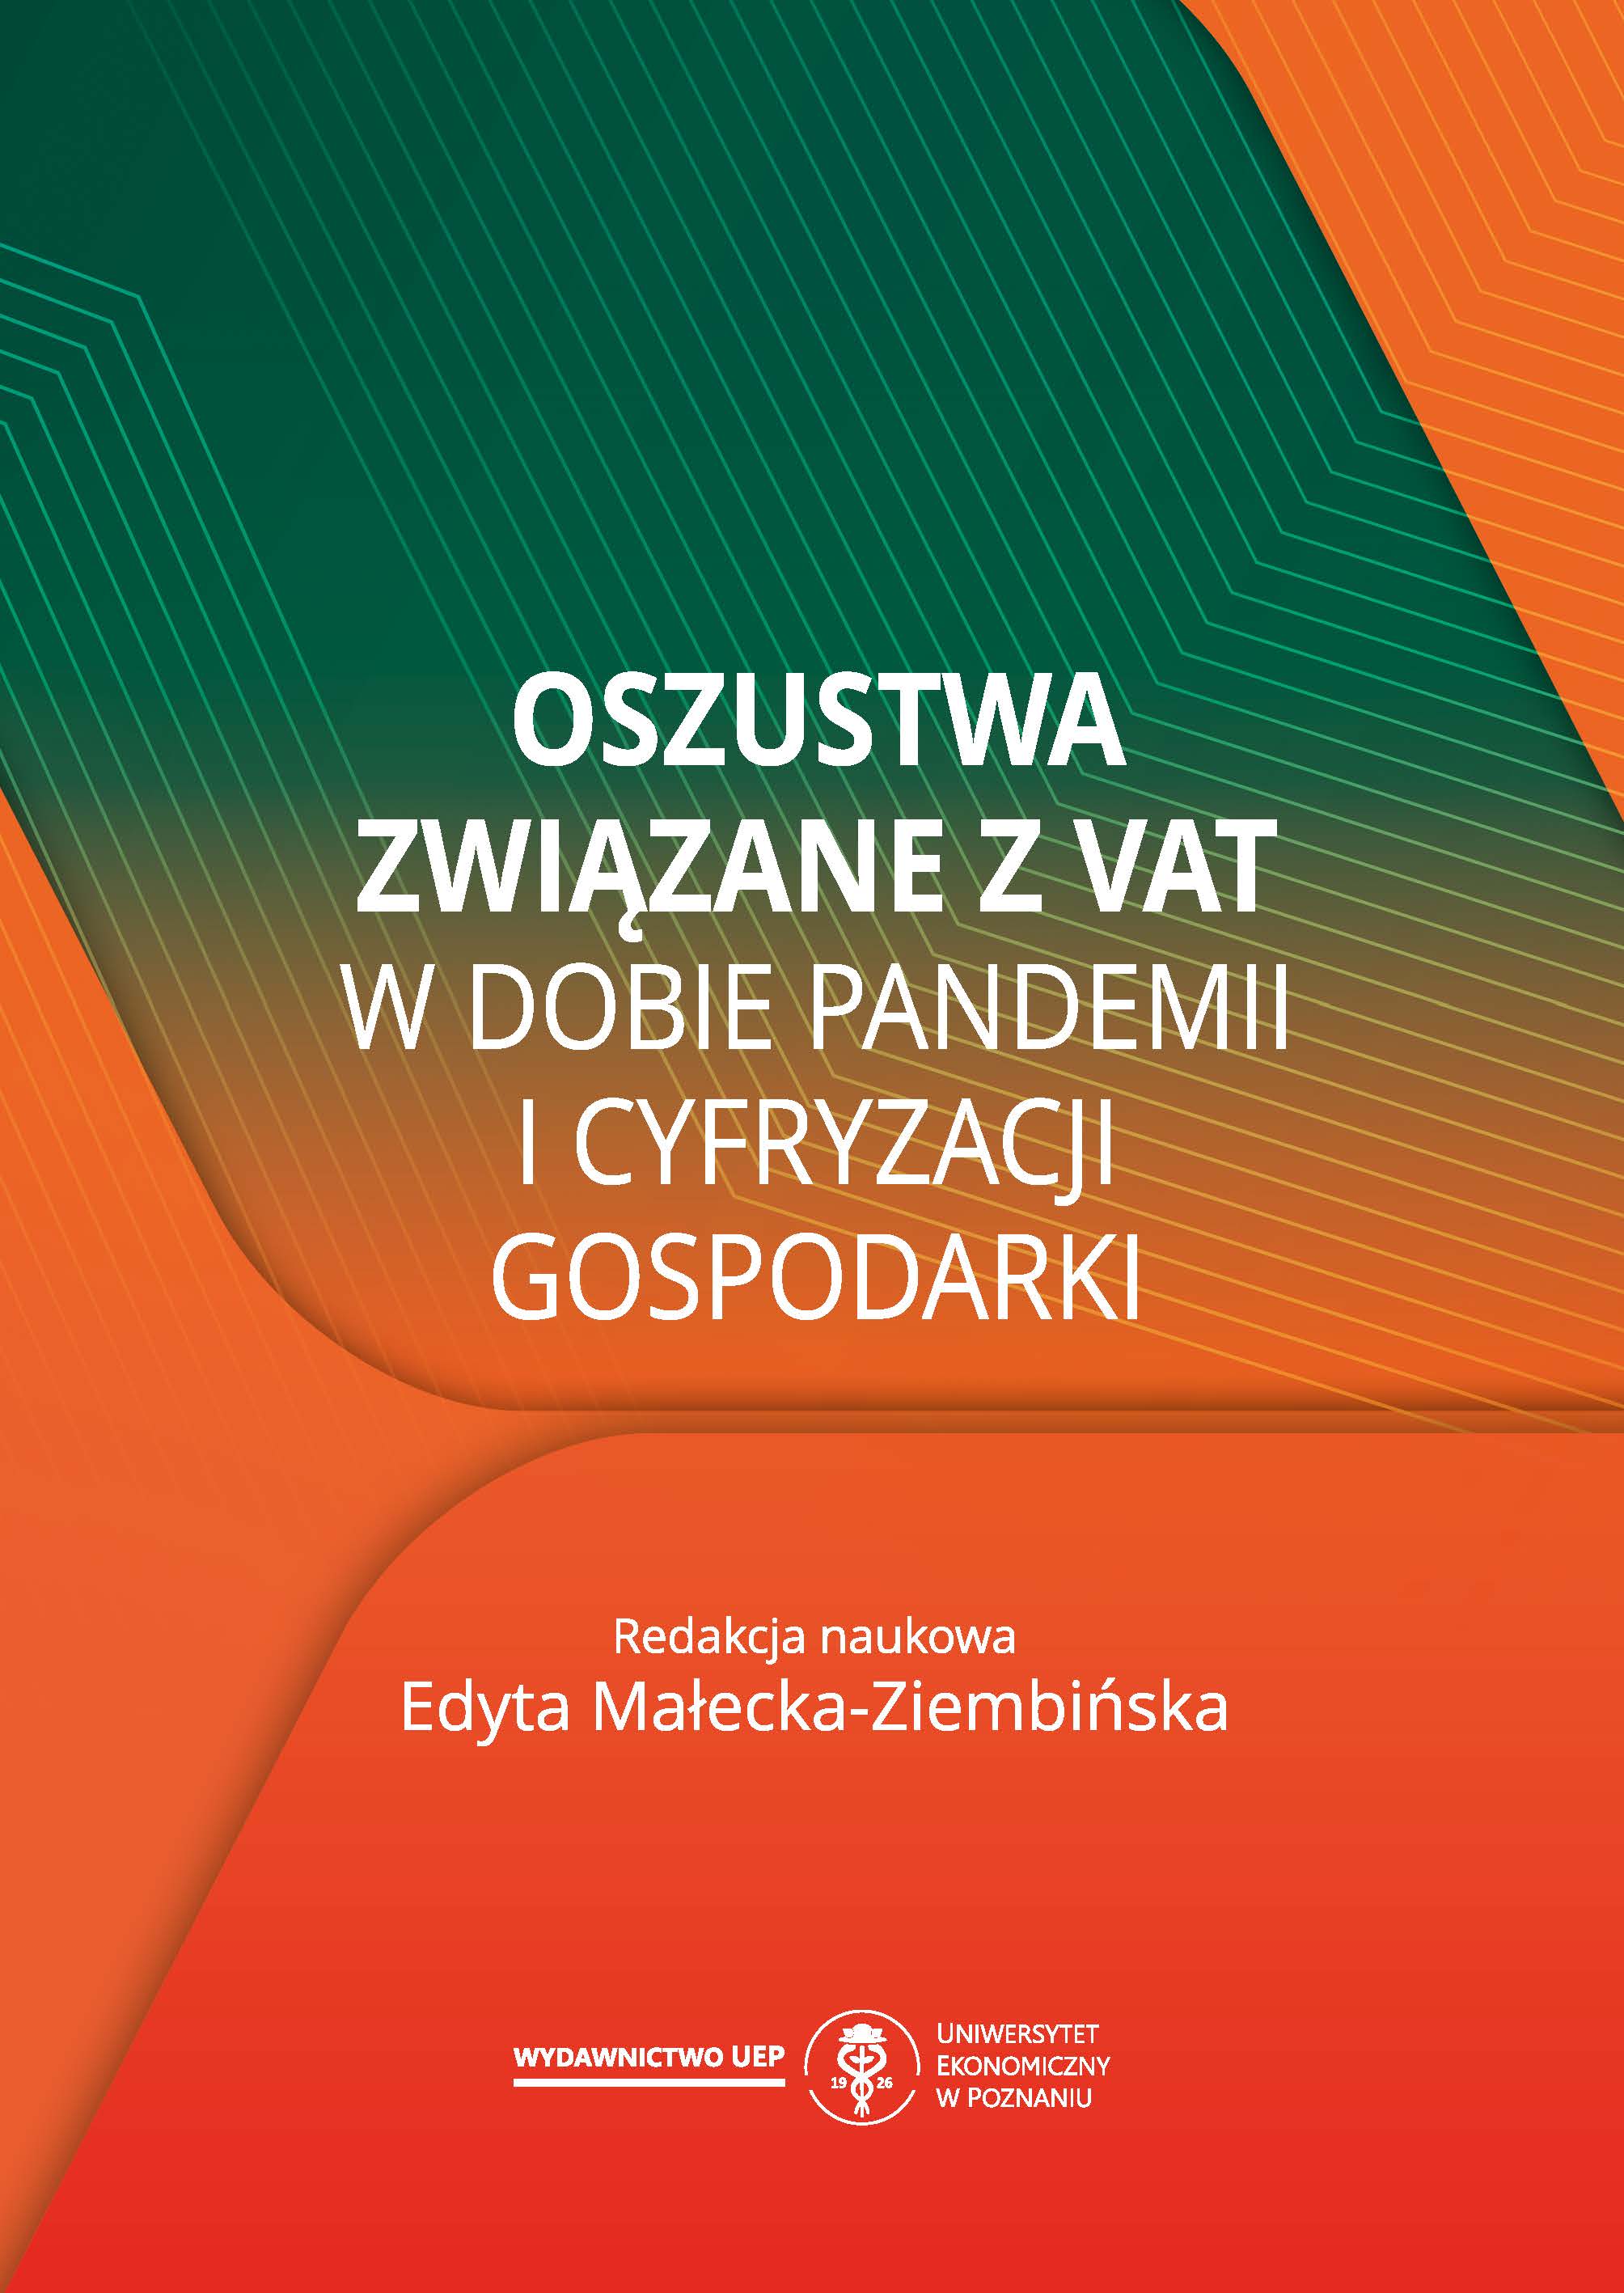 VAT gap and its consequences for public finances –
EU and Poland perspective